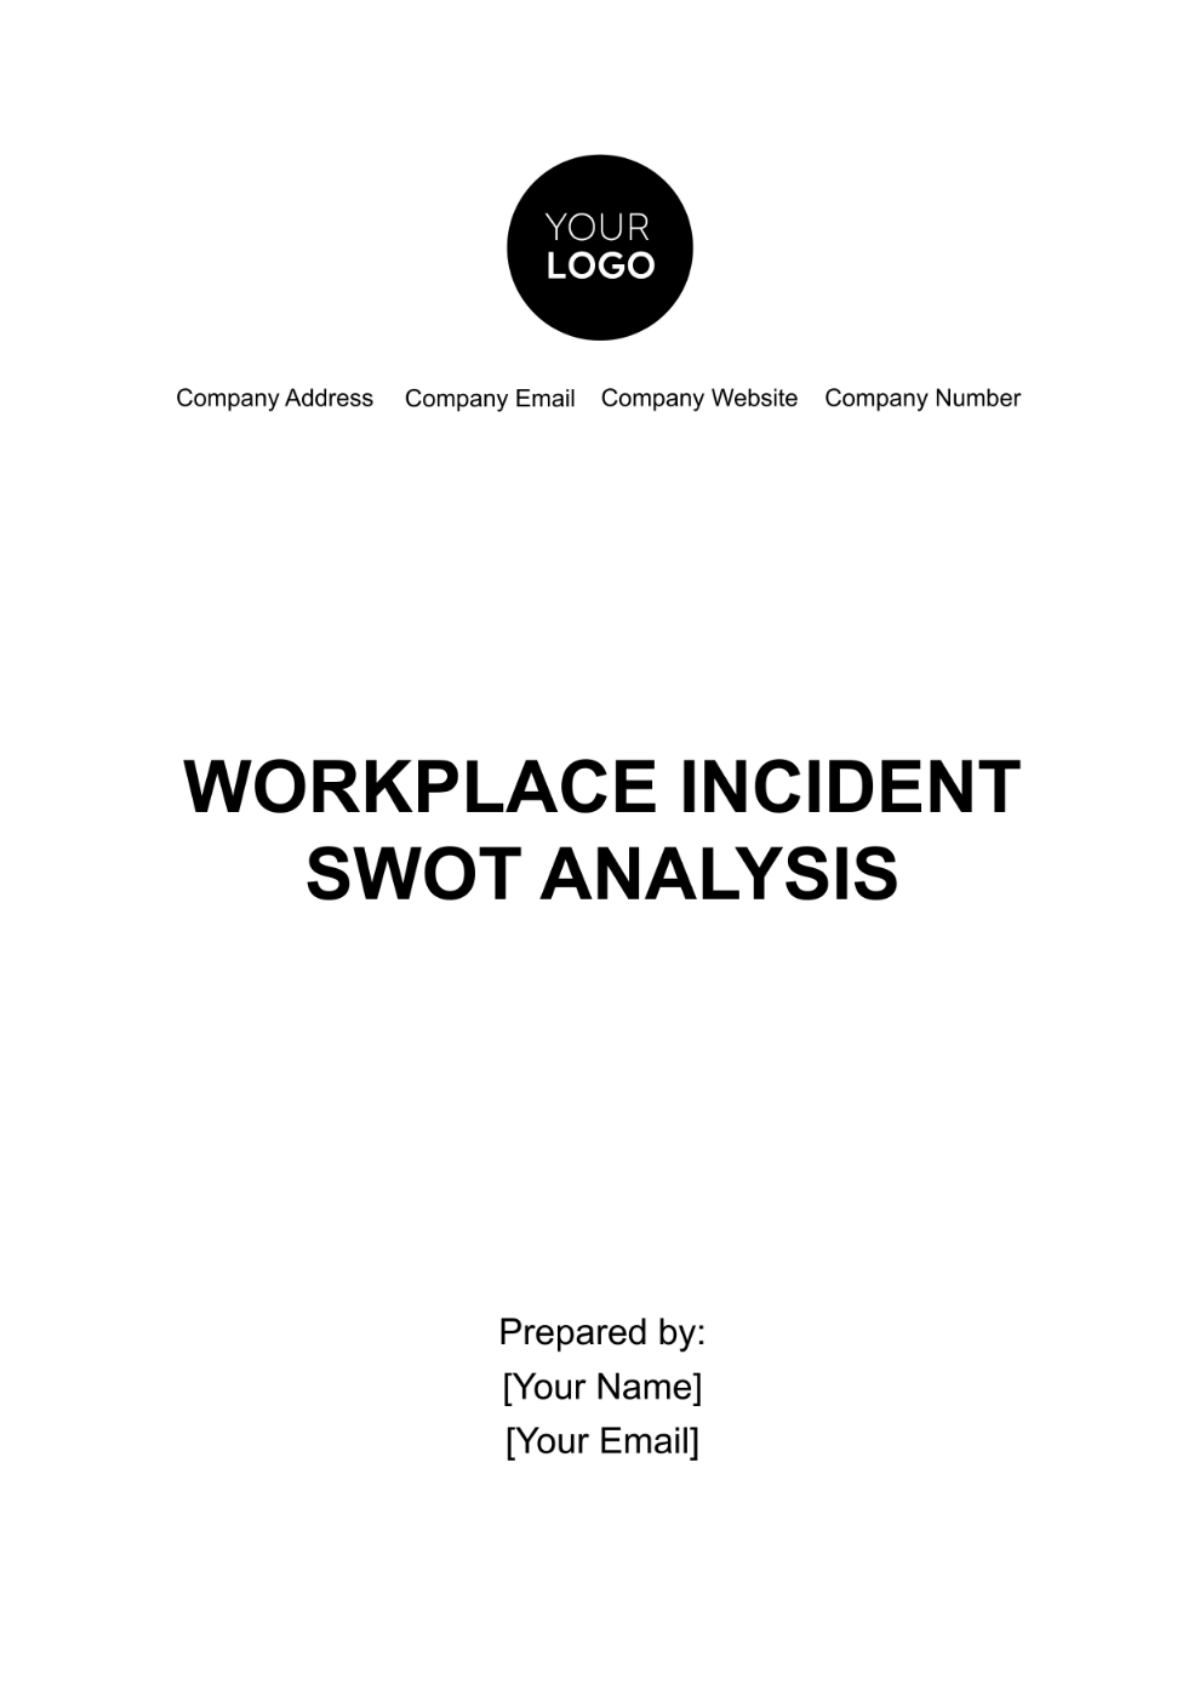 Workplace Incident SWOT Analysis Template